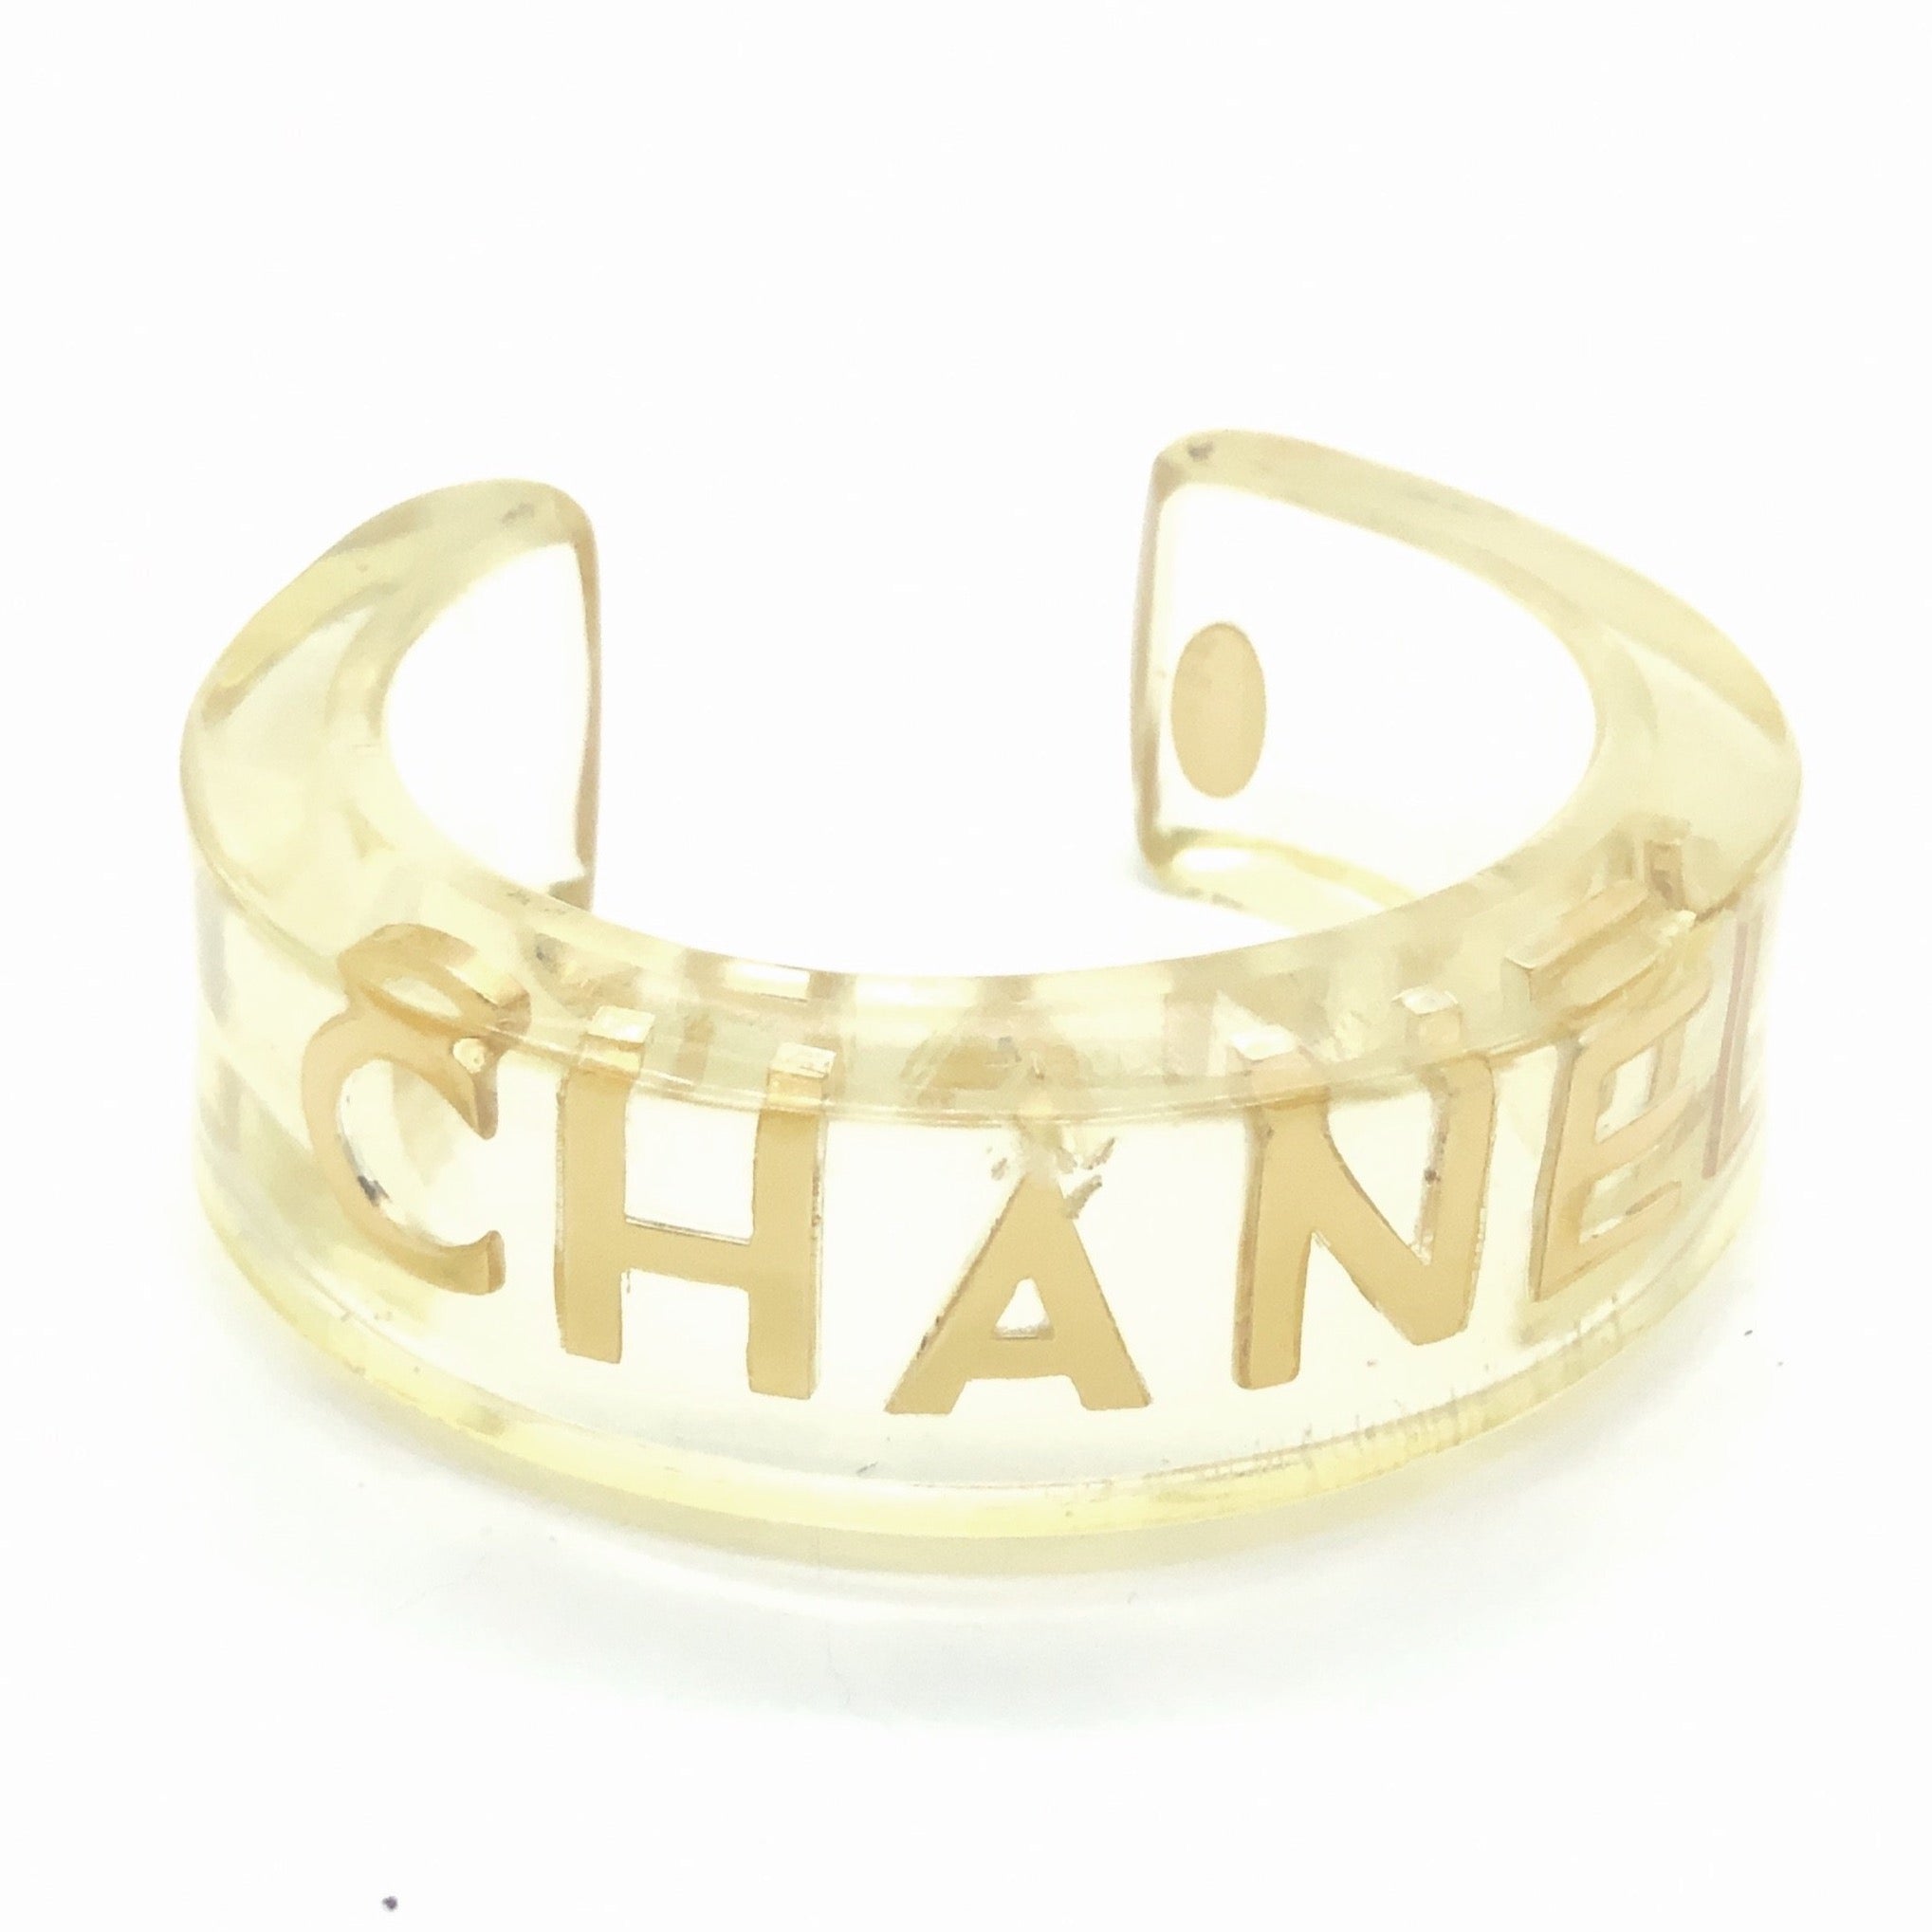 Vintage Chanel Lucite Cuff with CHANEL in Gold – Very Vintage